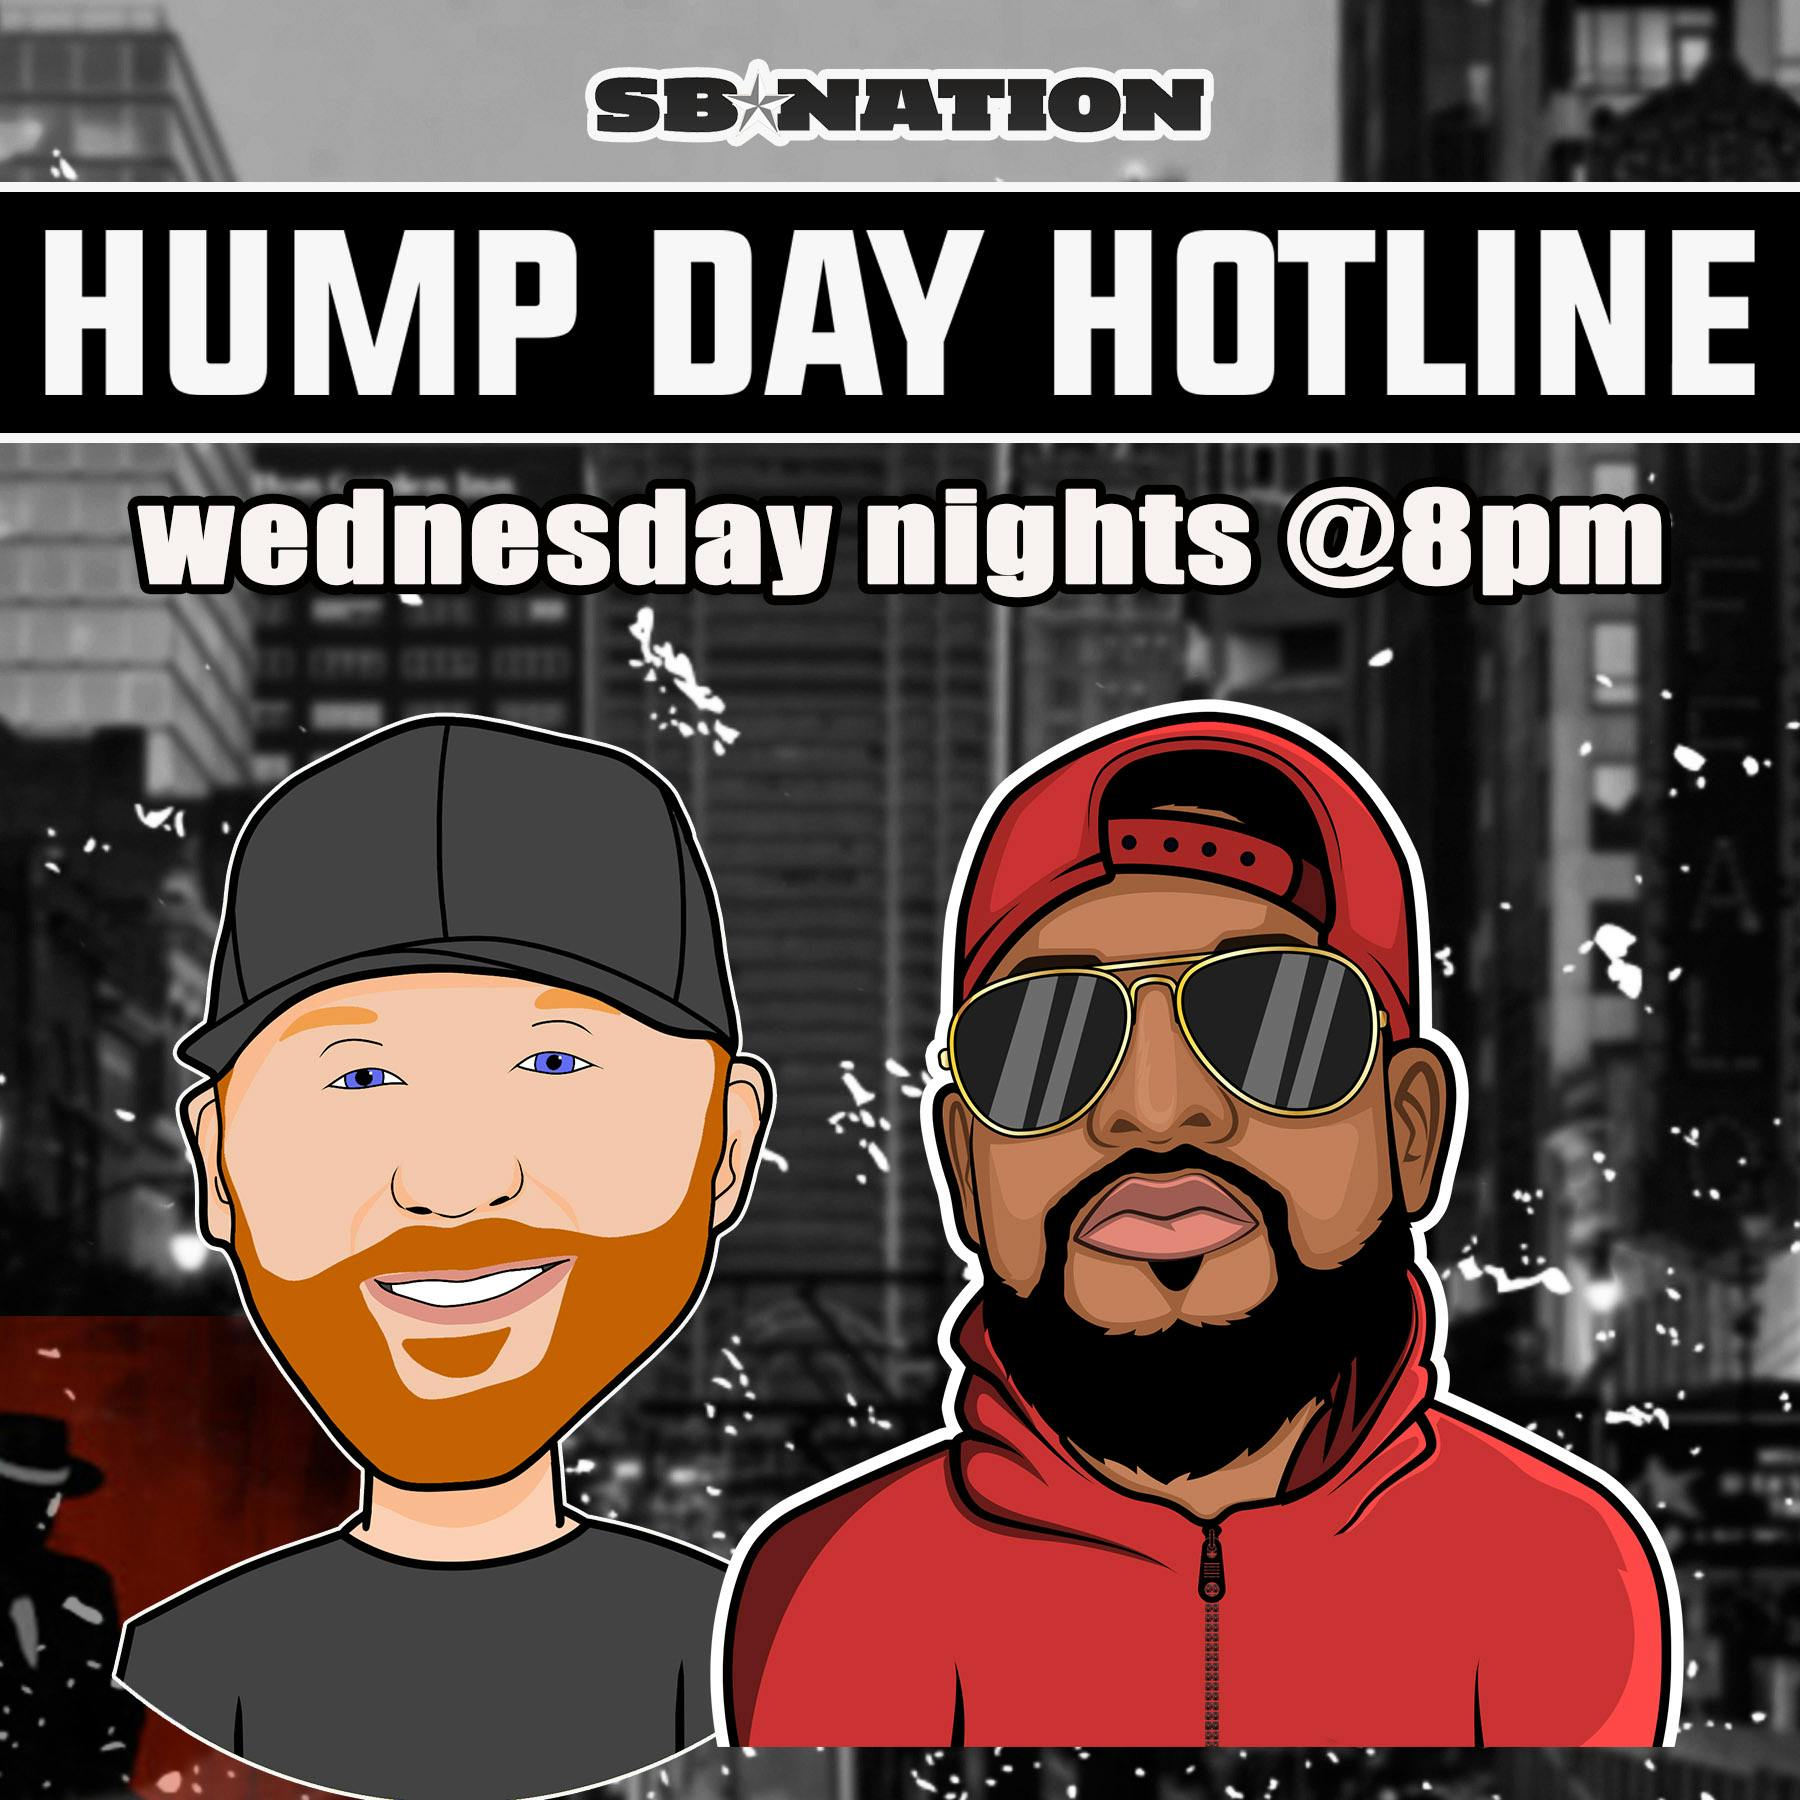 Hump Day Hotline - Pounded the Pats